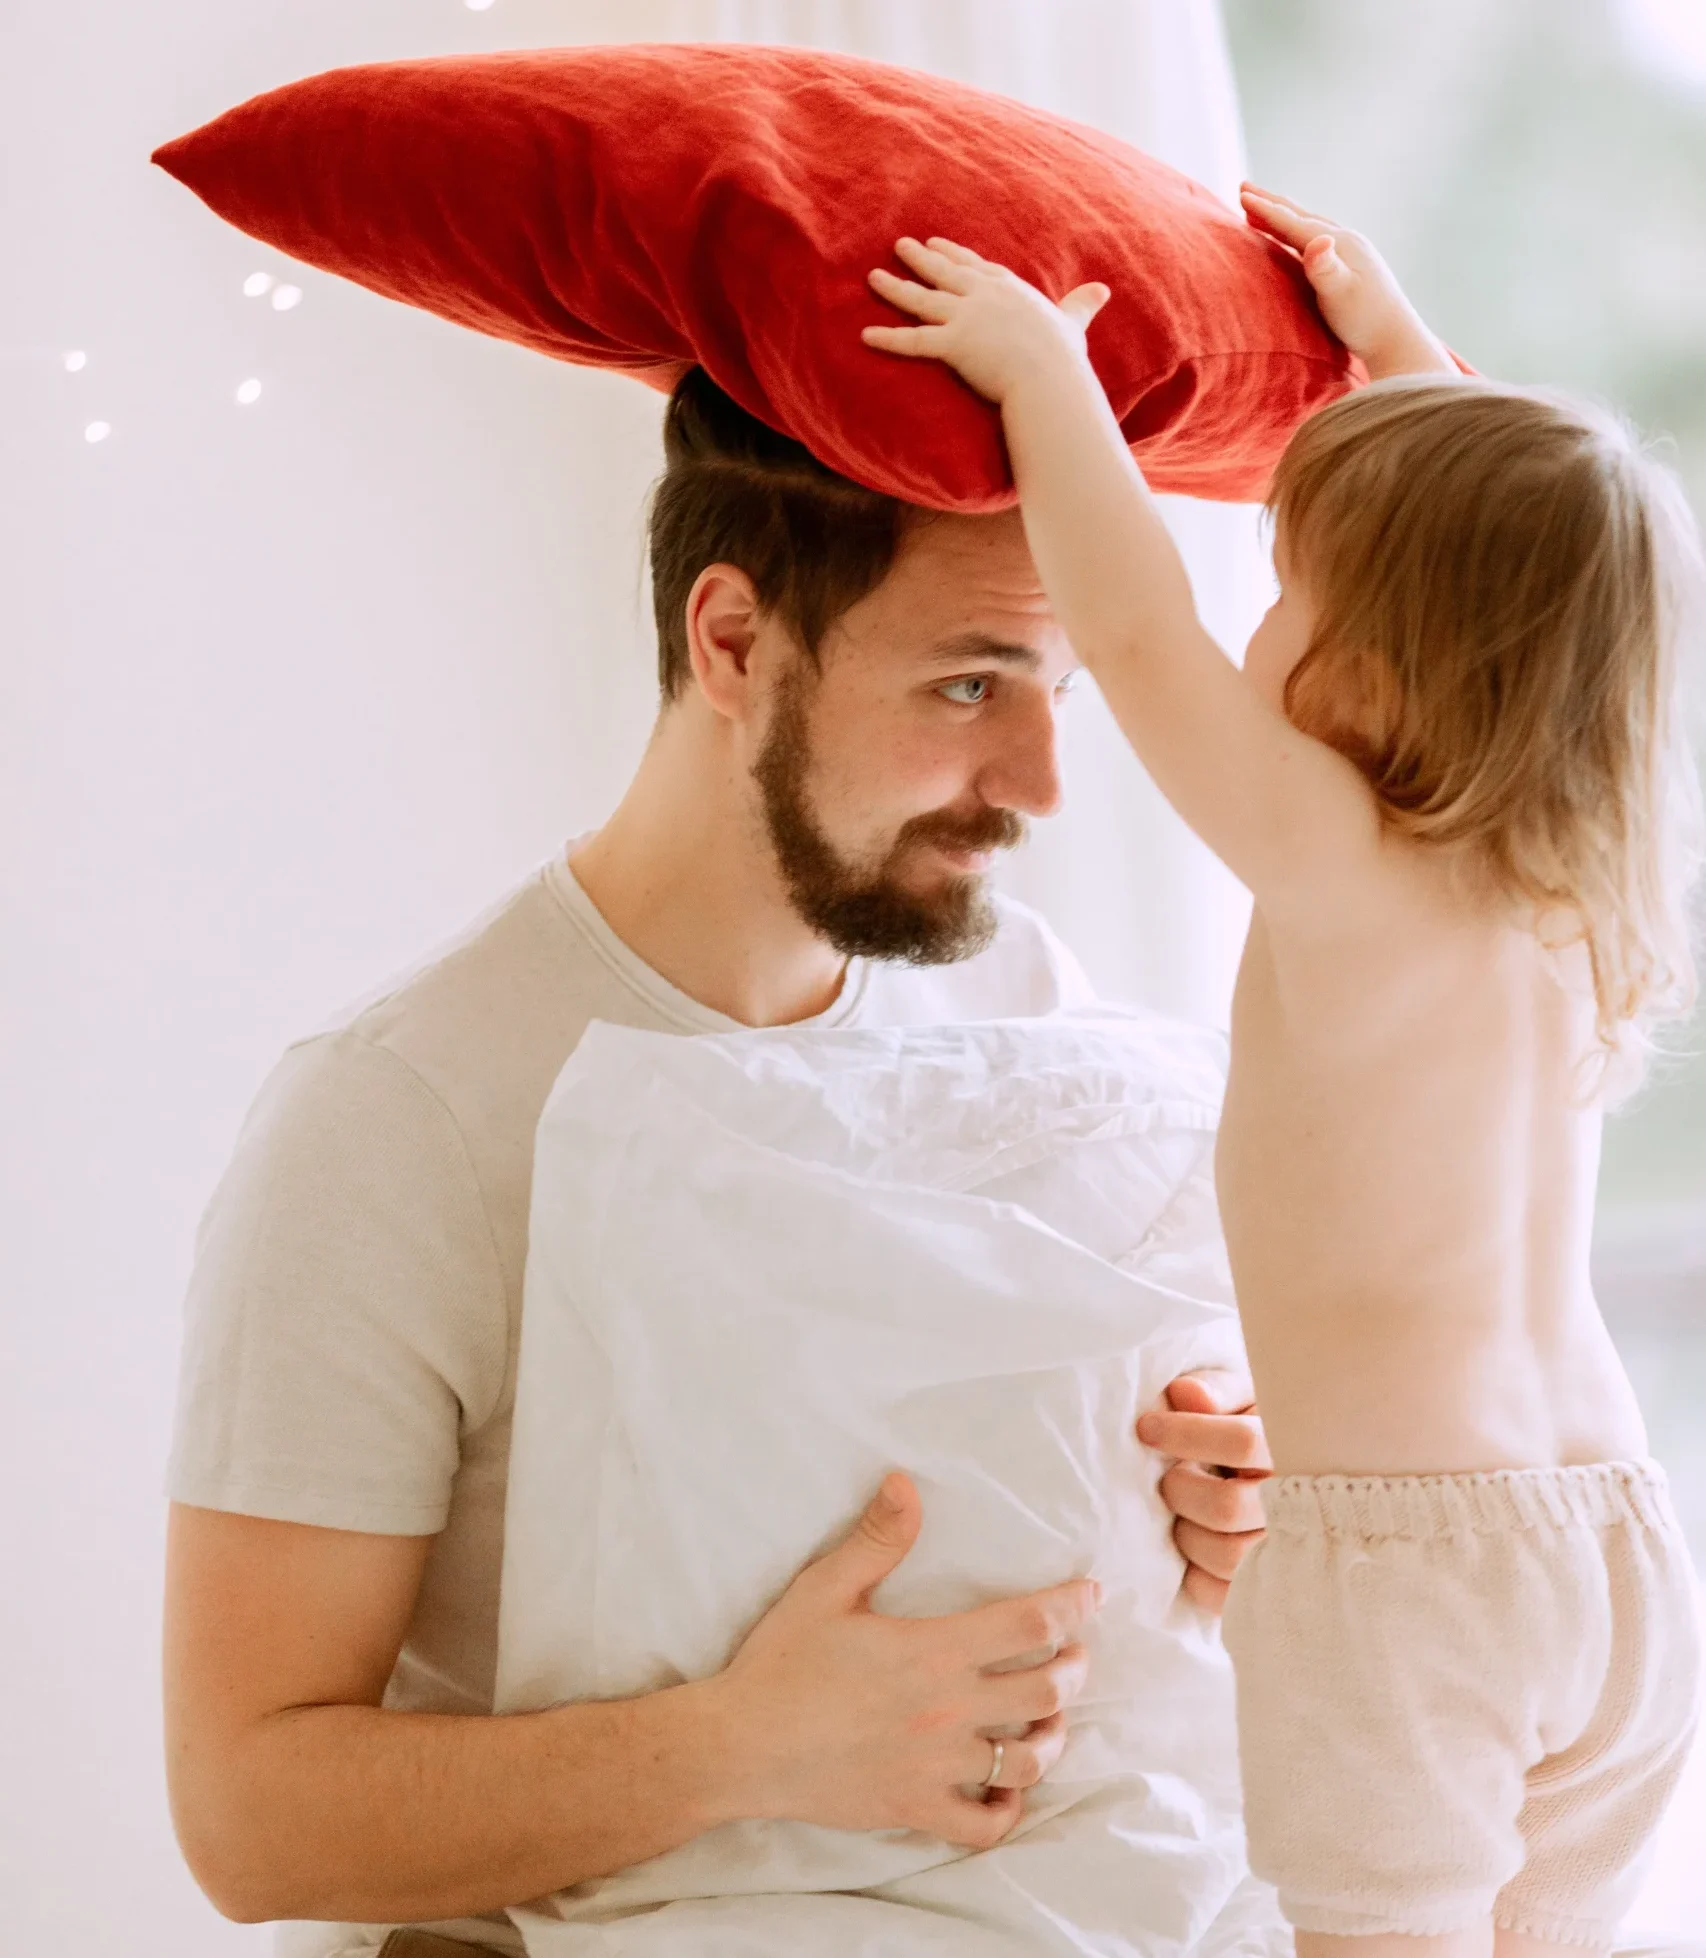 Toddler Daughter placing pillow on her father while they play